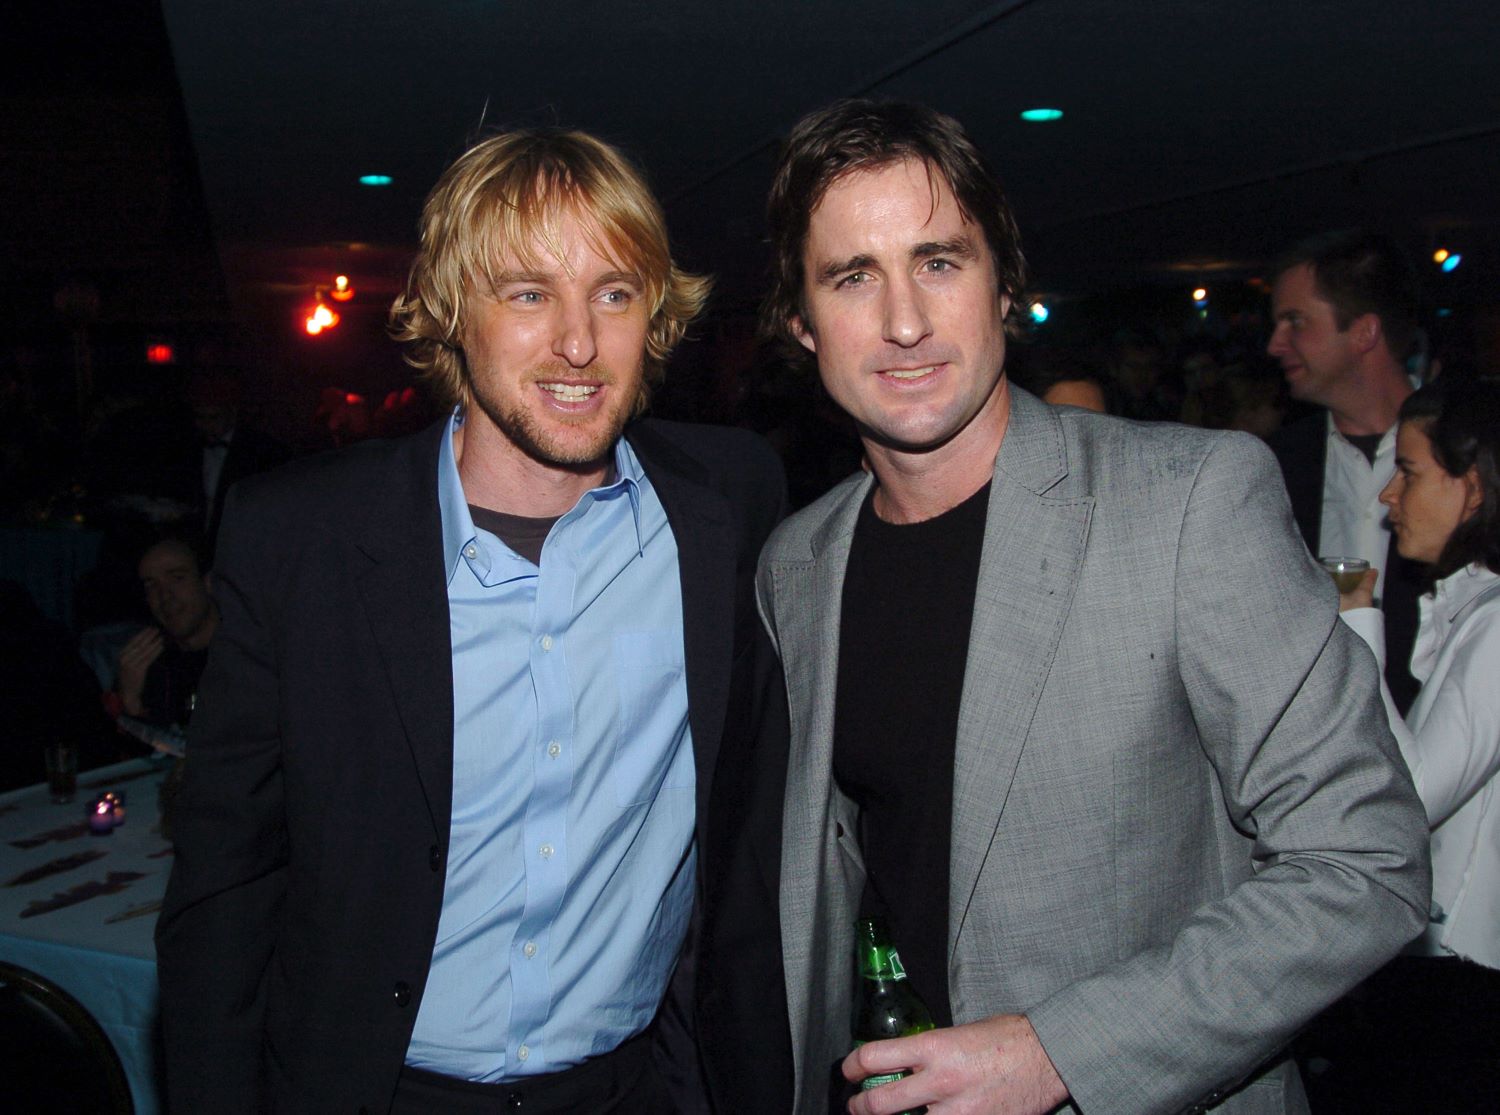 Owen Wilson and Luke Wilson standing together smiling